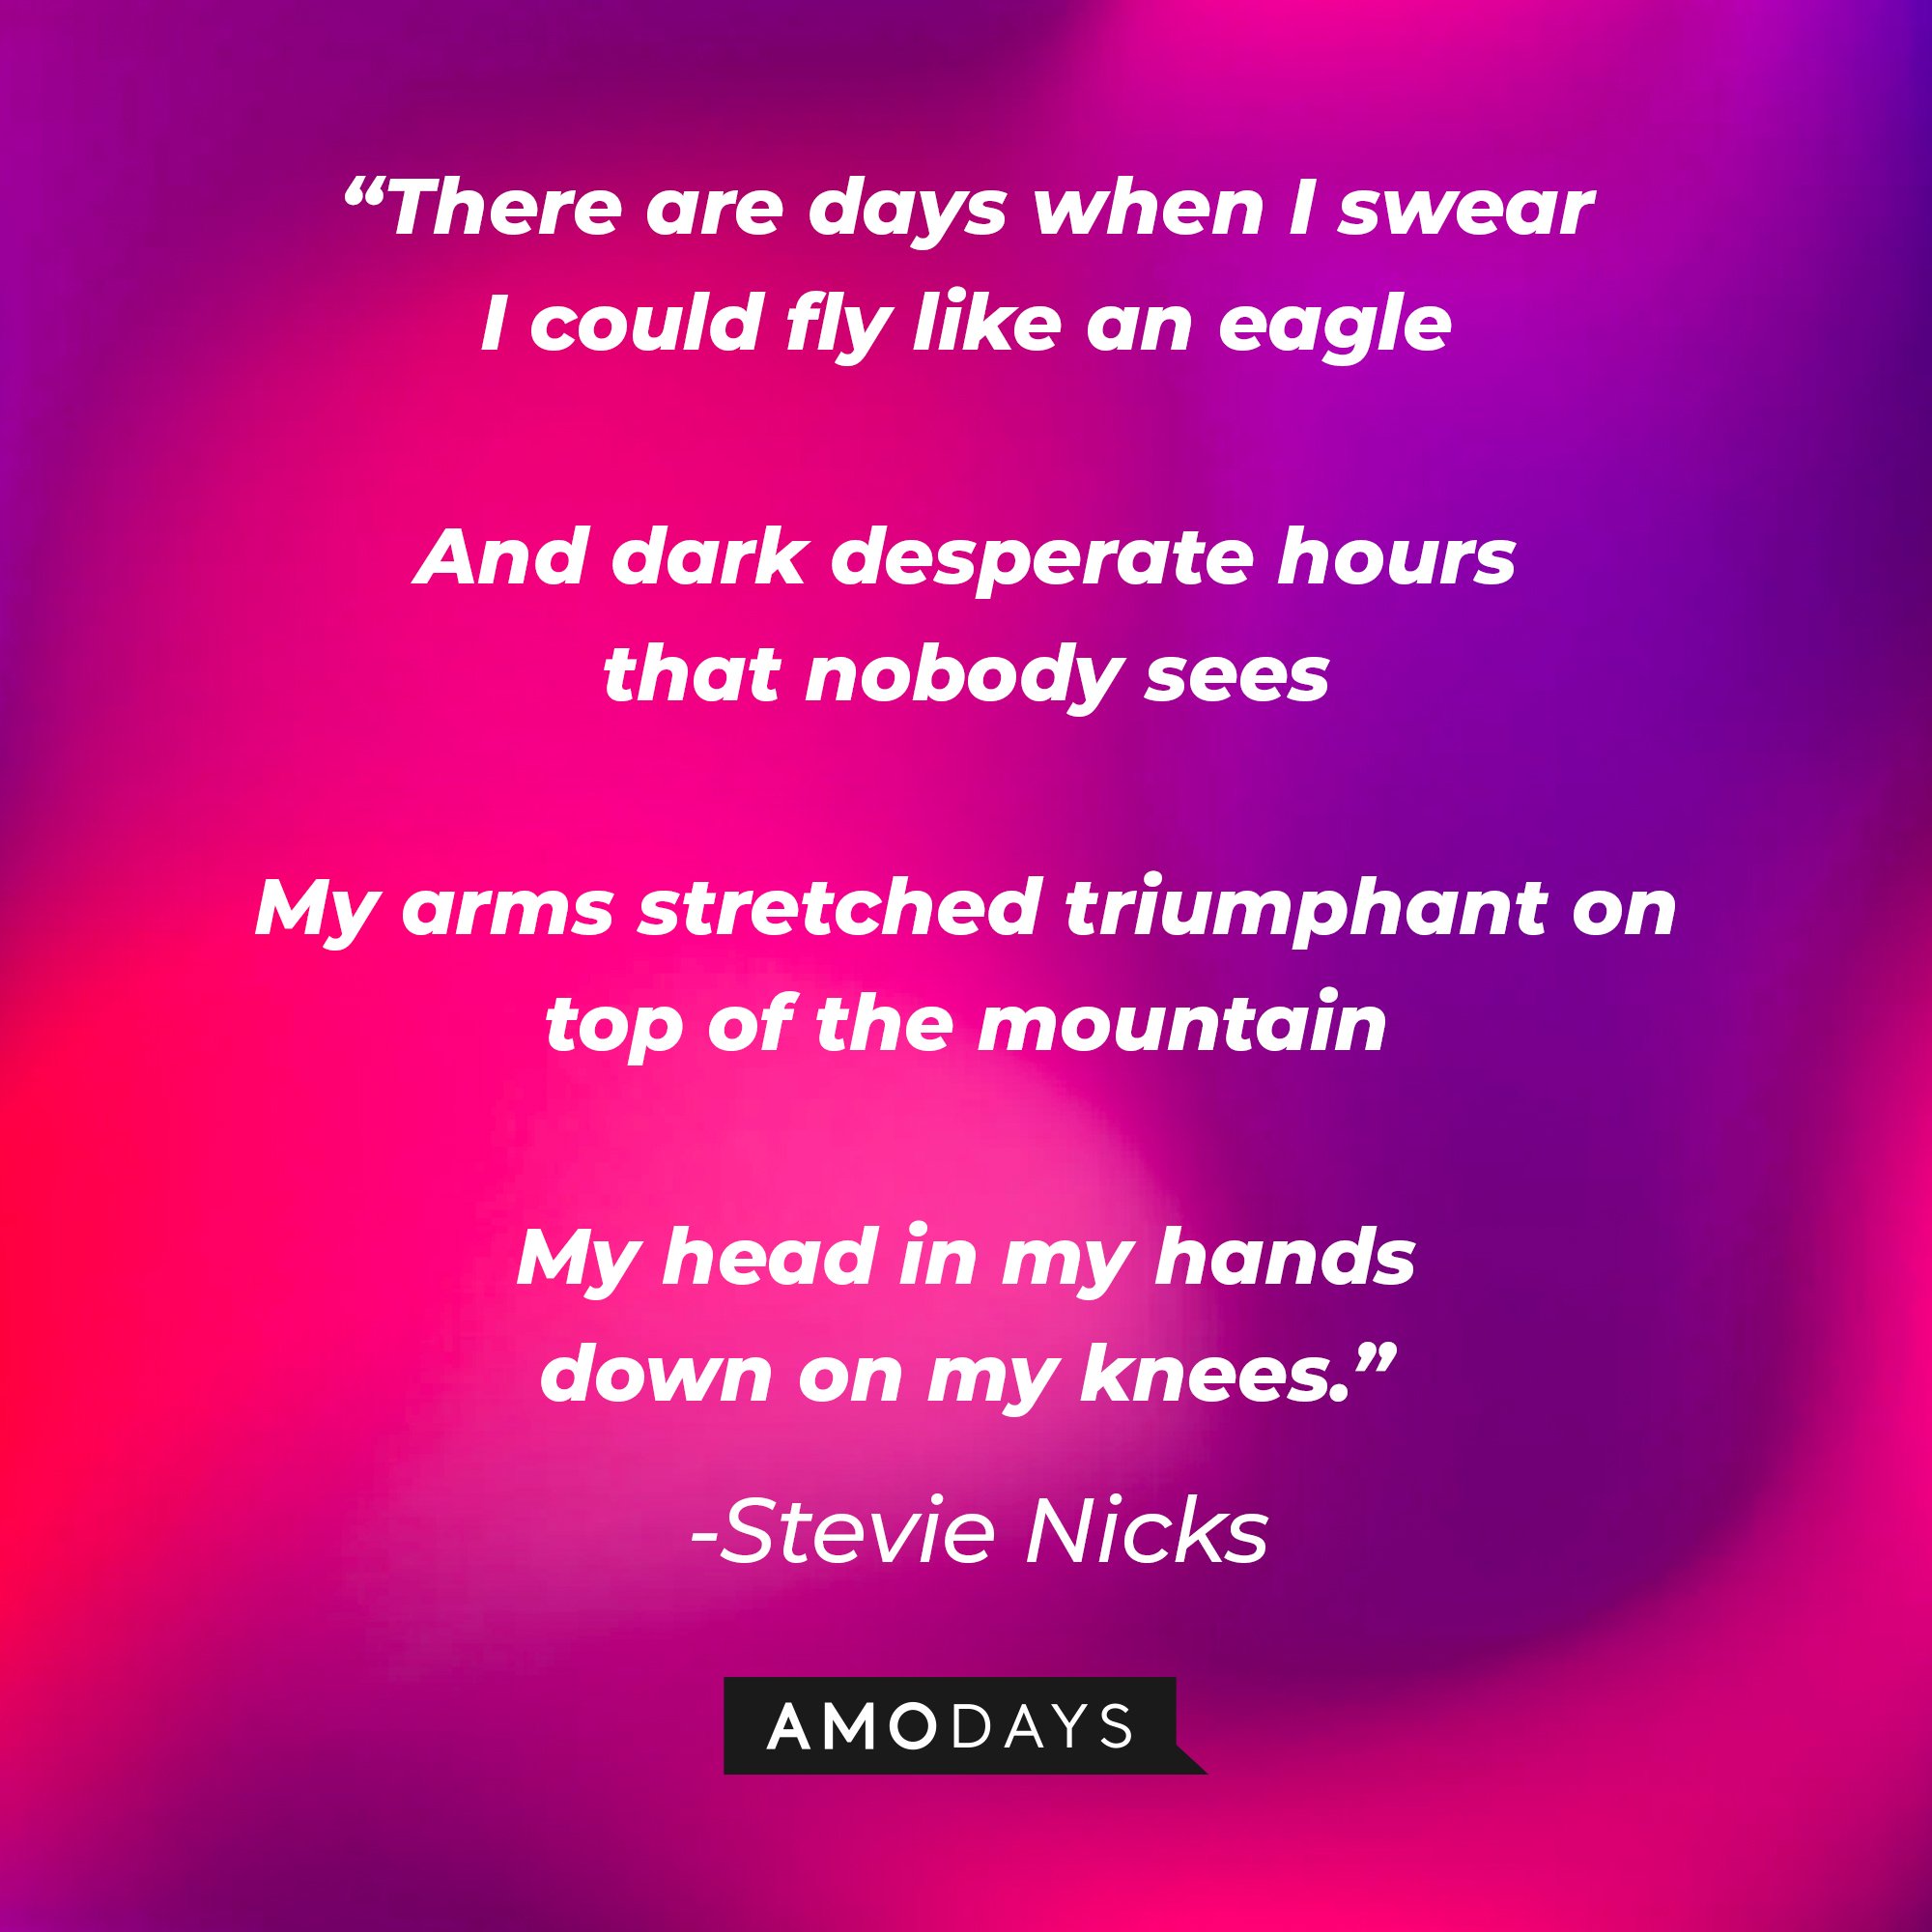 Stevie Nicks's quote: "There are days when I swear I could fly like an eagle And dark desperate hours that nobody sees My arms stretched triumphant on top of the mountain My head in my hands down on my knees." | Image: AmoDays